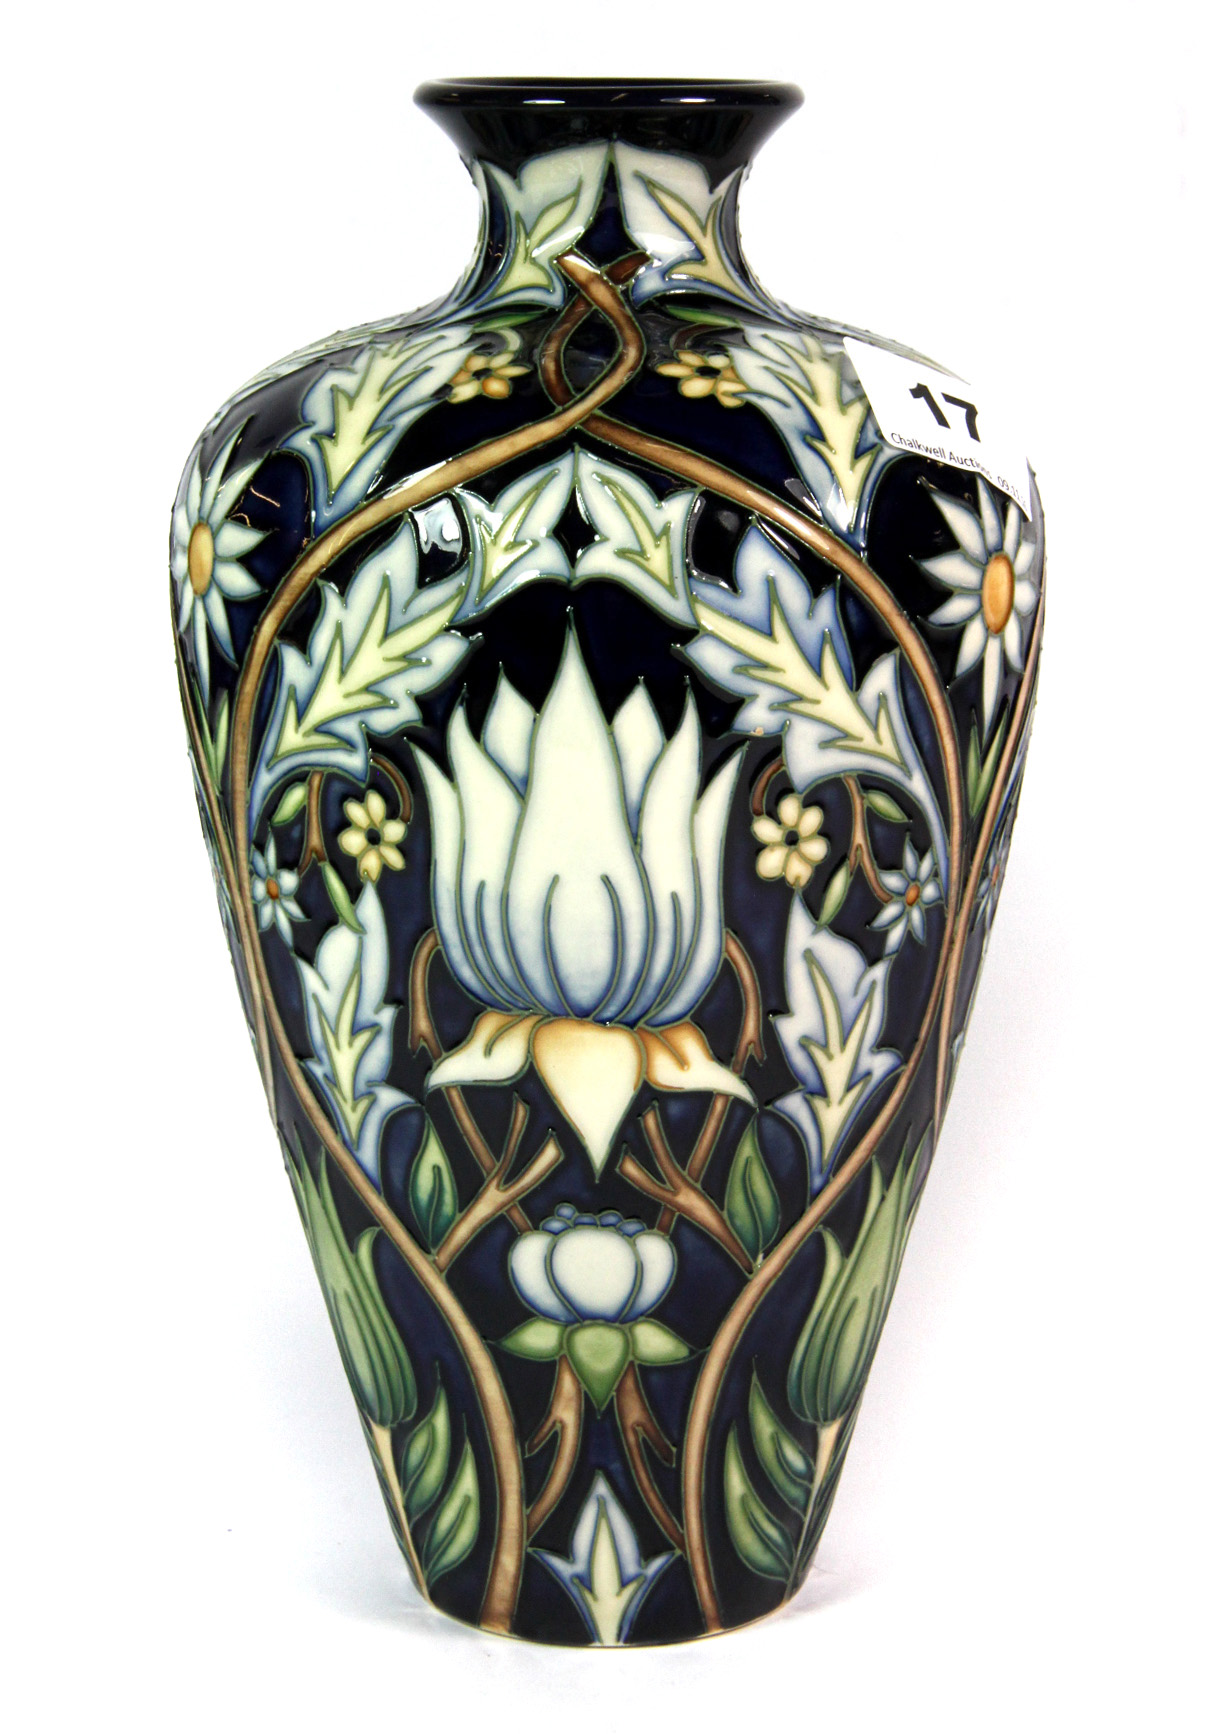 A Moorcroft pottery "Tribute to William Morris" vase, H. 24cm. - Image 2 of 4